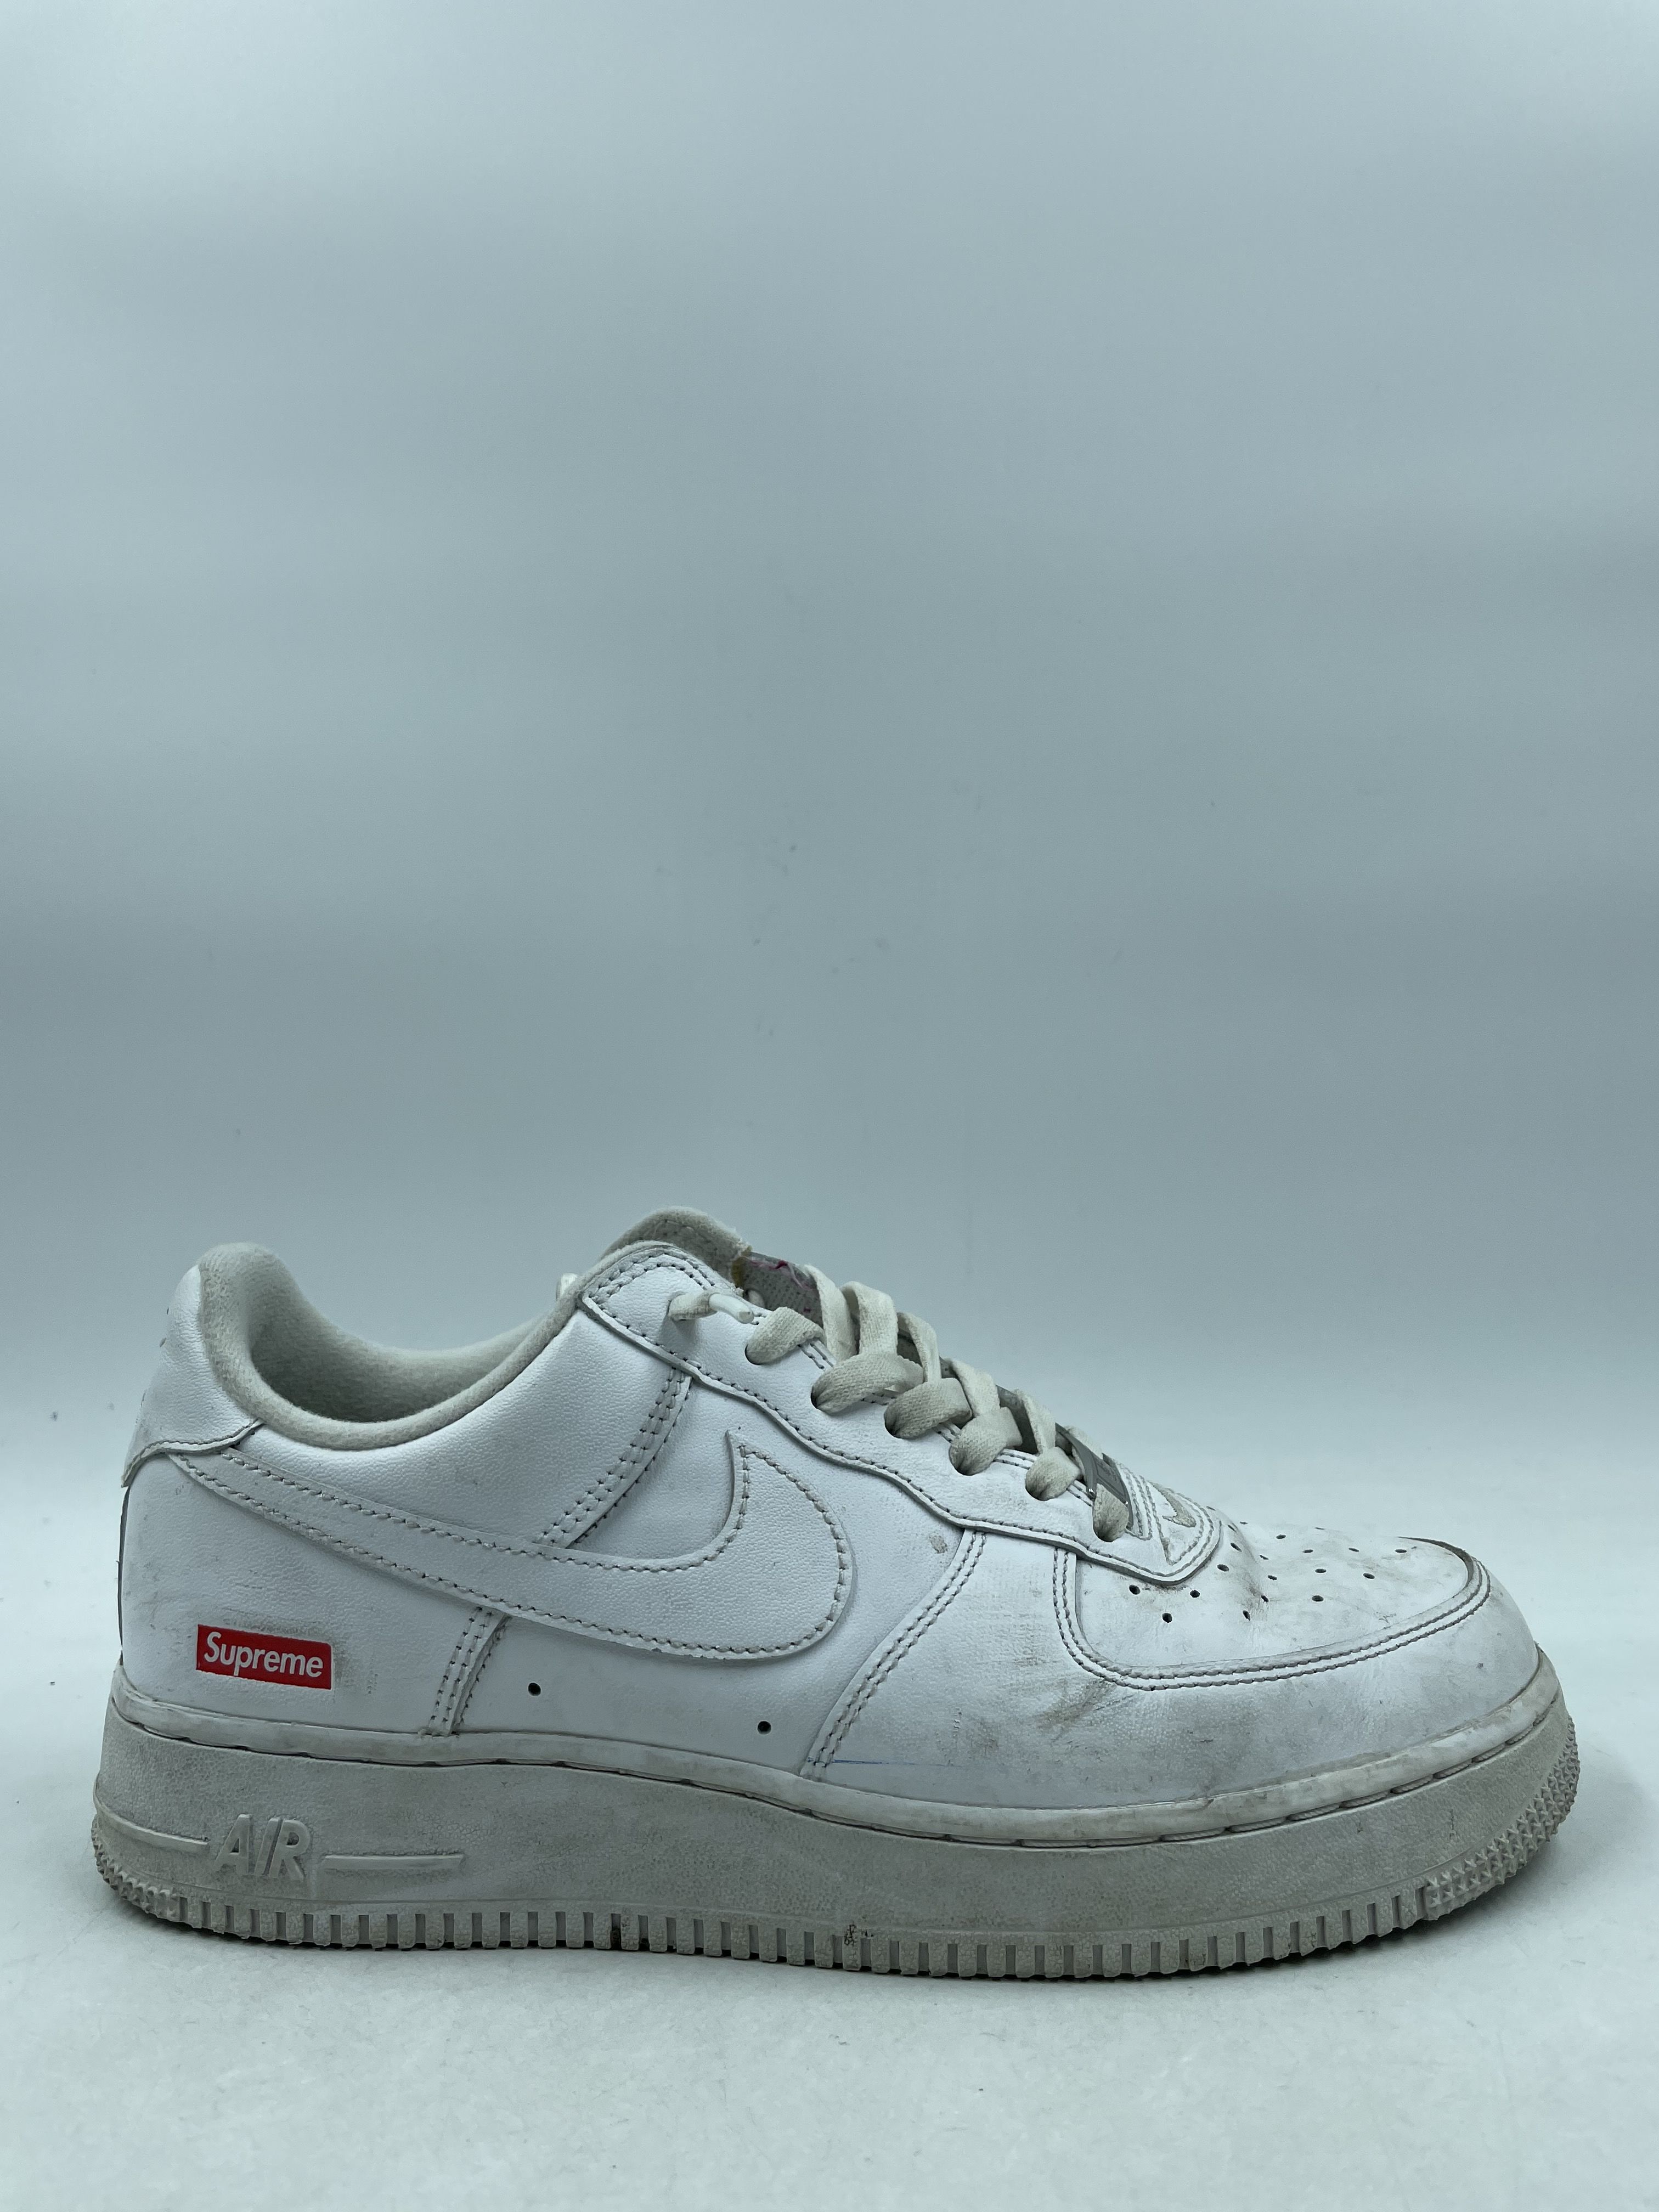 SUPREME White Air forces always available! Sizes 6-13 To purchase please go  to our website or DM with the size your interested in. Nat... | Instagram